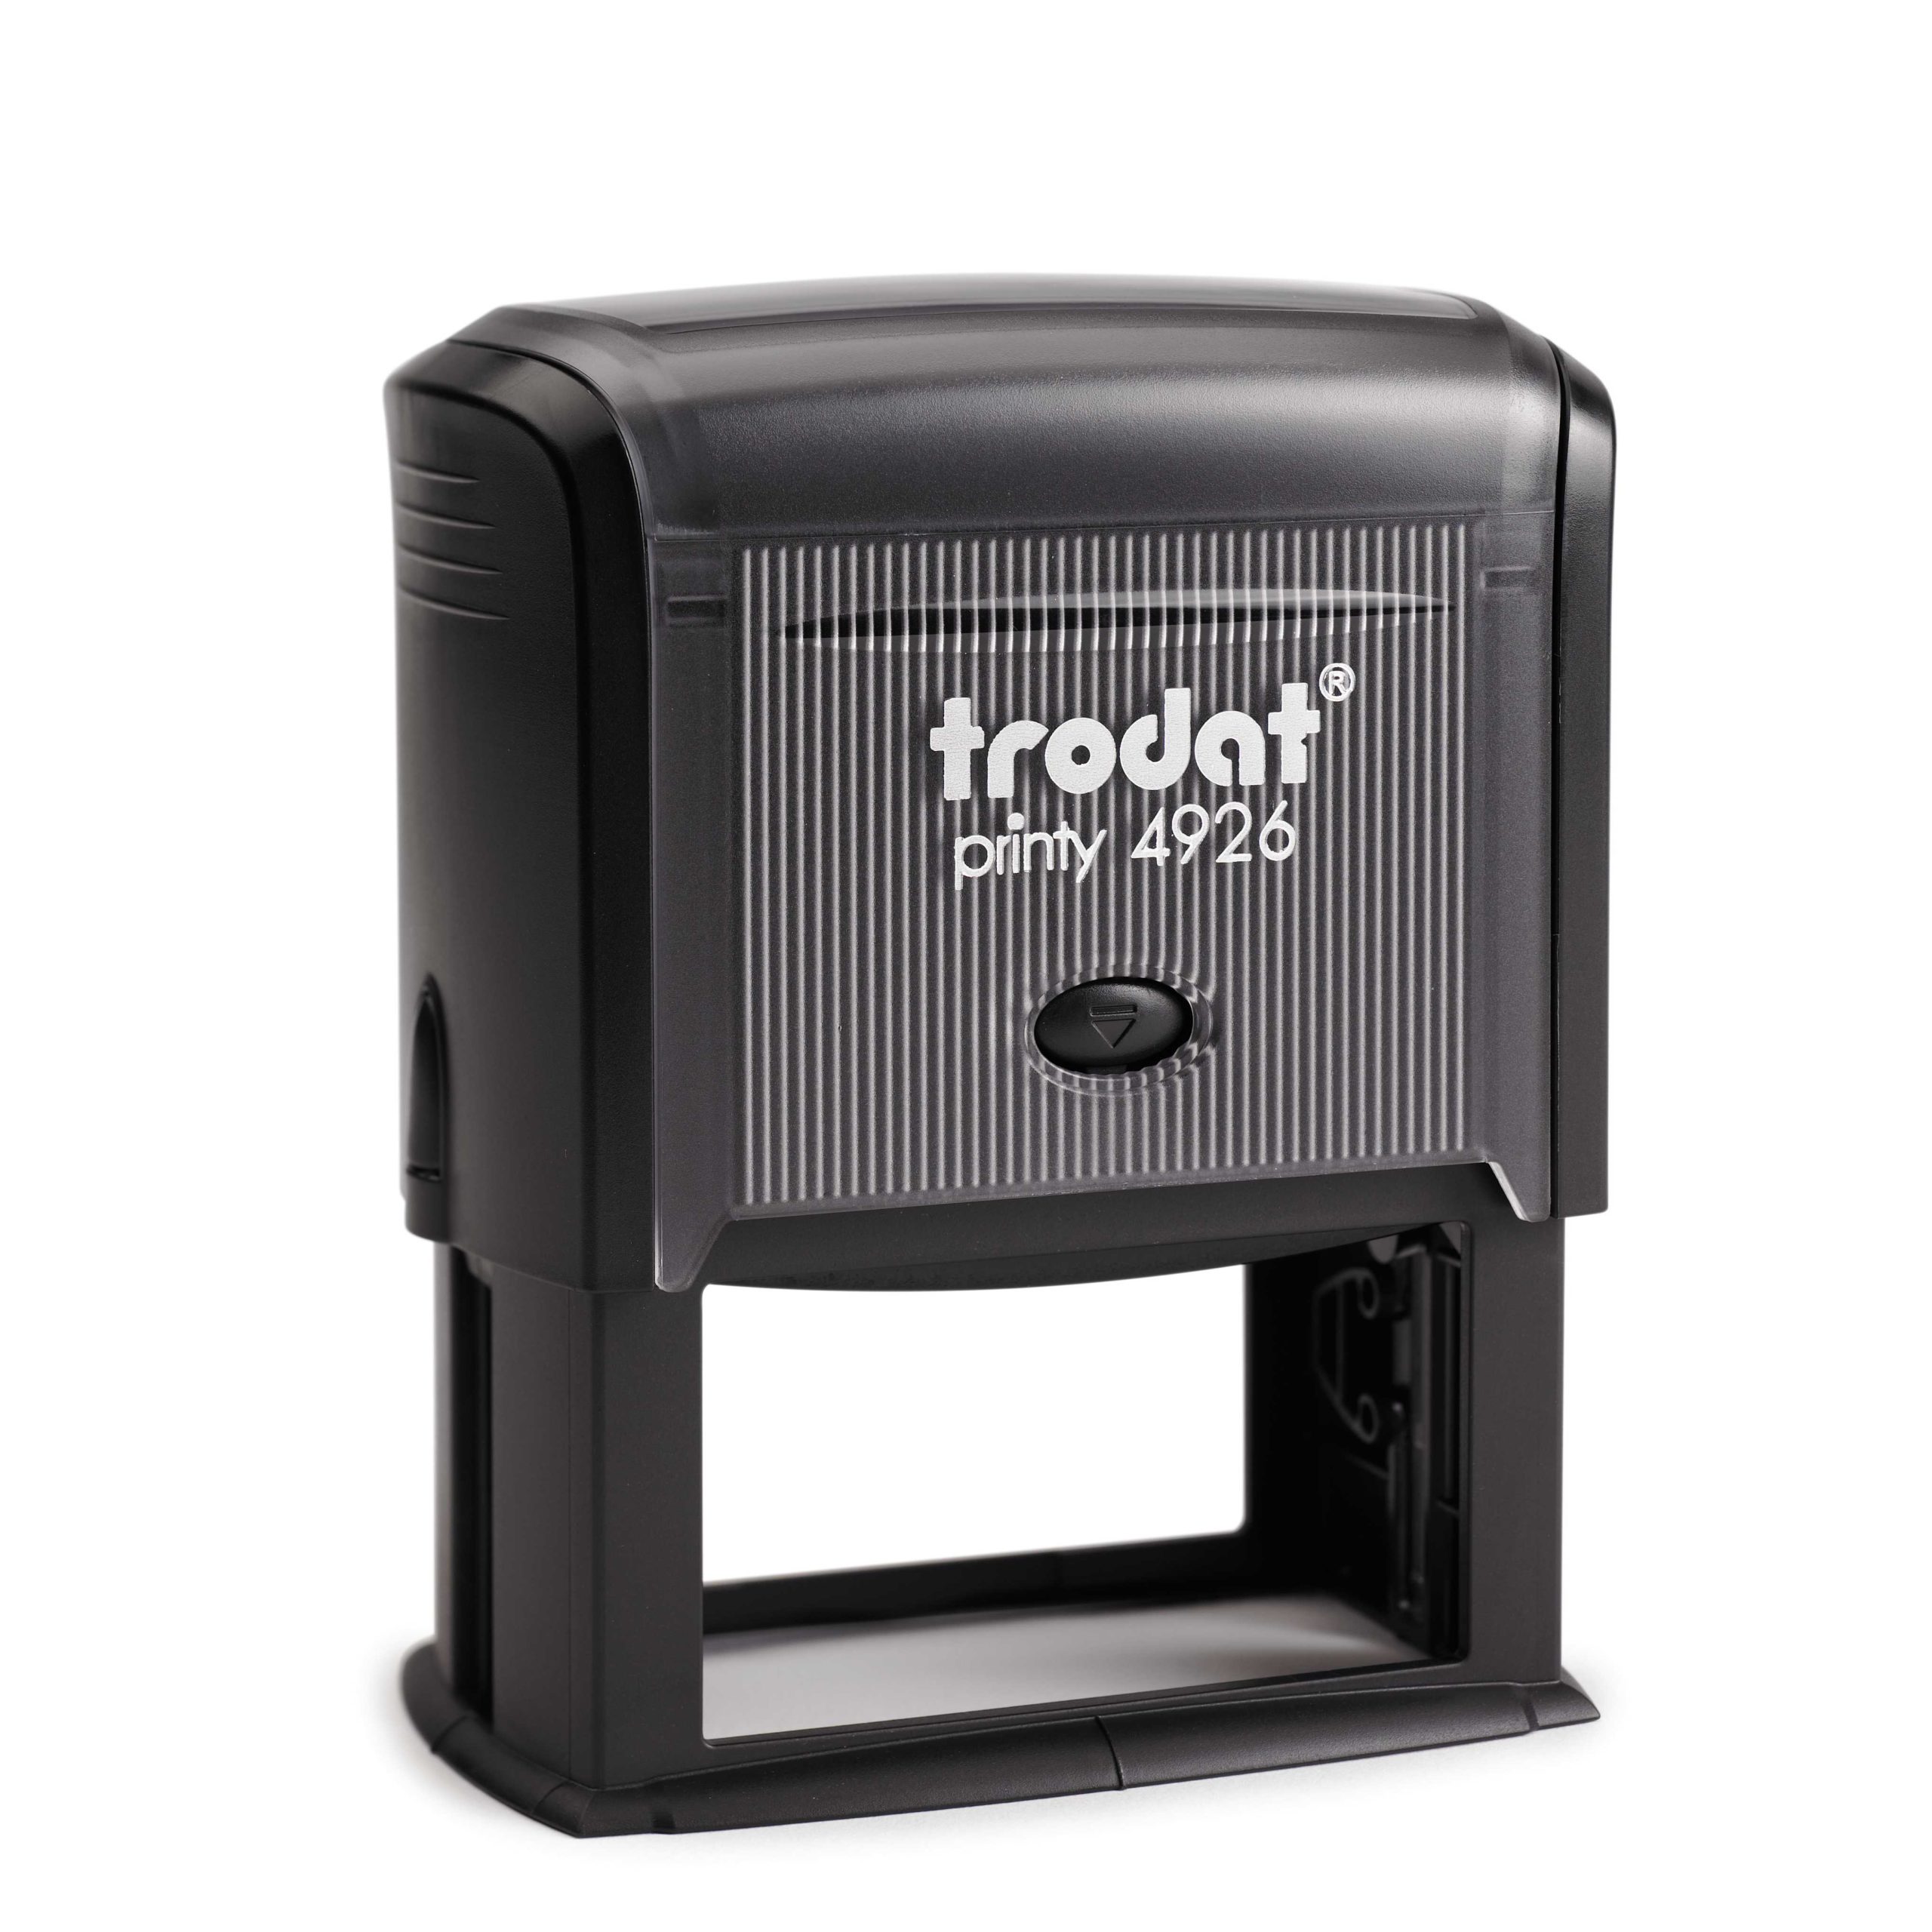  Custom Name Signature Stamp Personalized Self Inking Stamp  Easy for Business Signing Checks Office School Work : Office Products